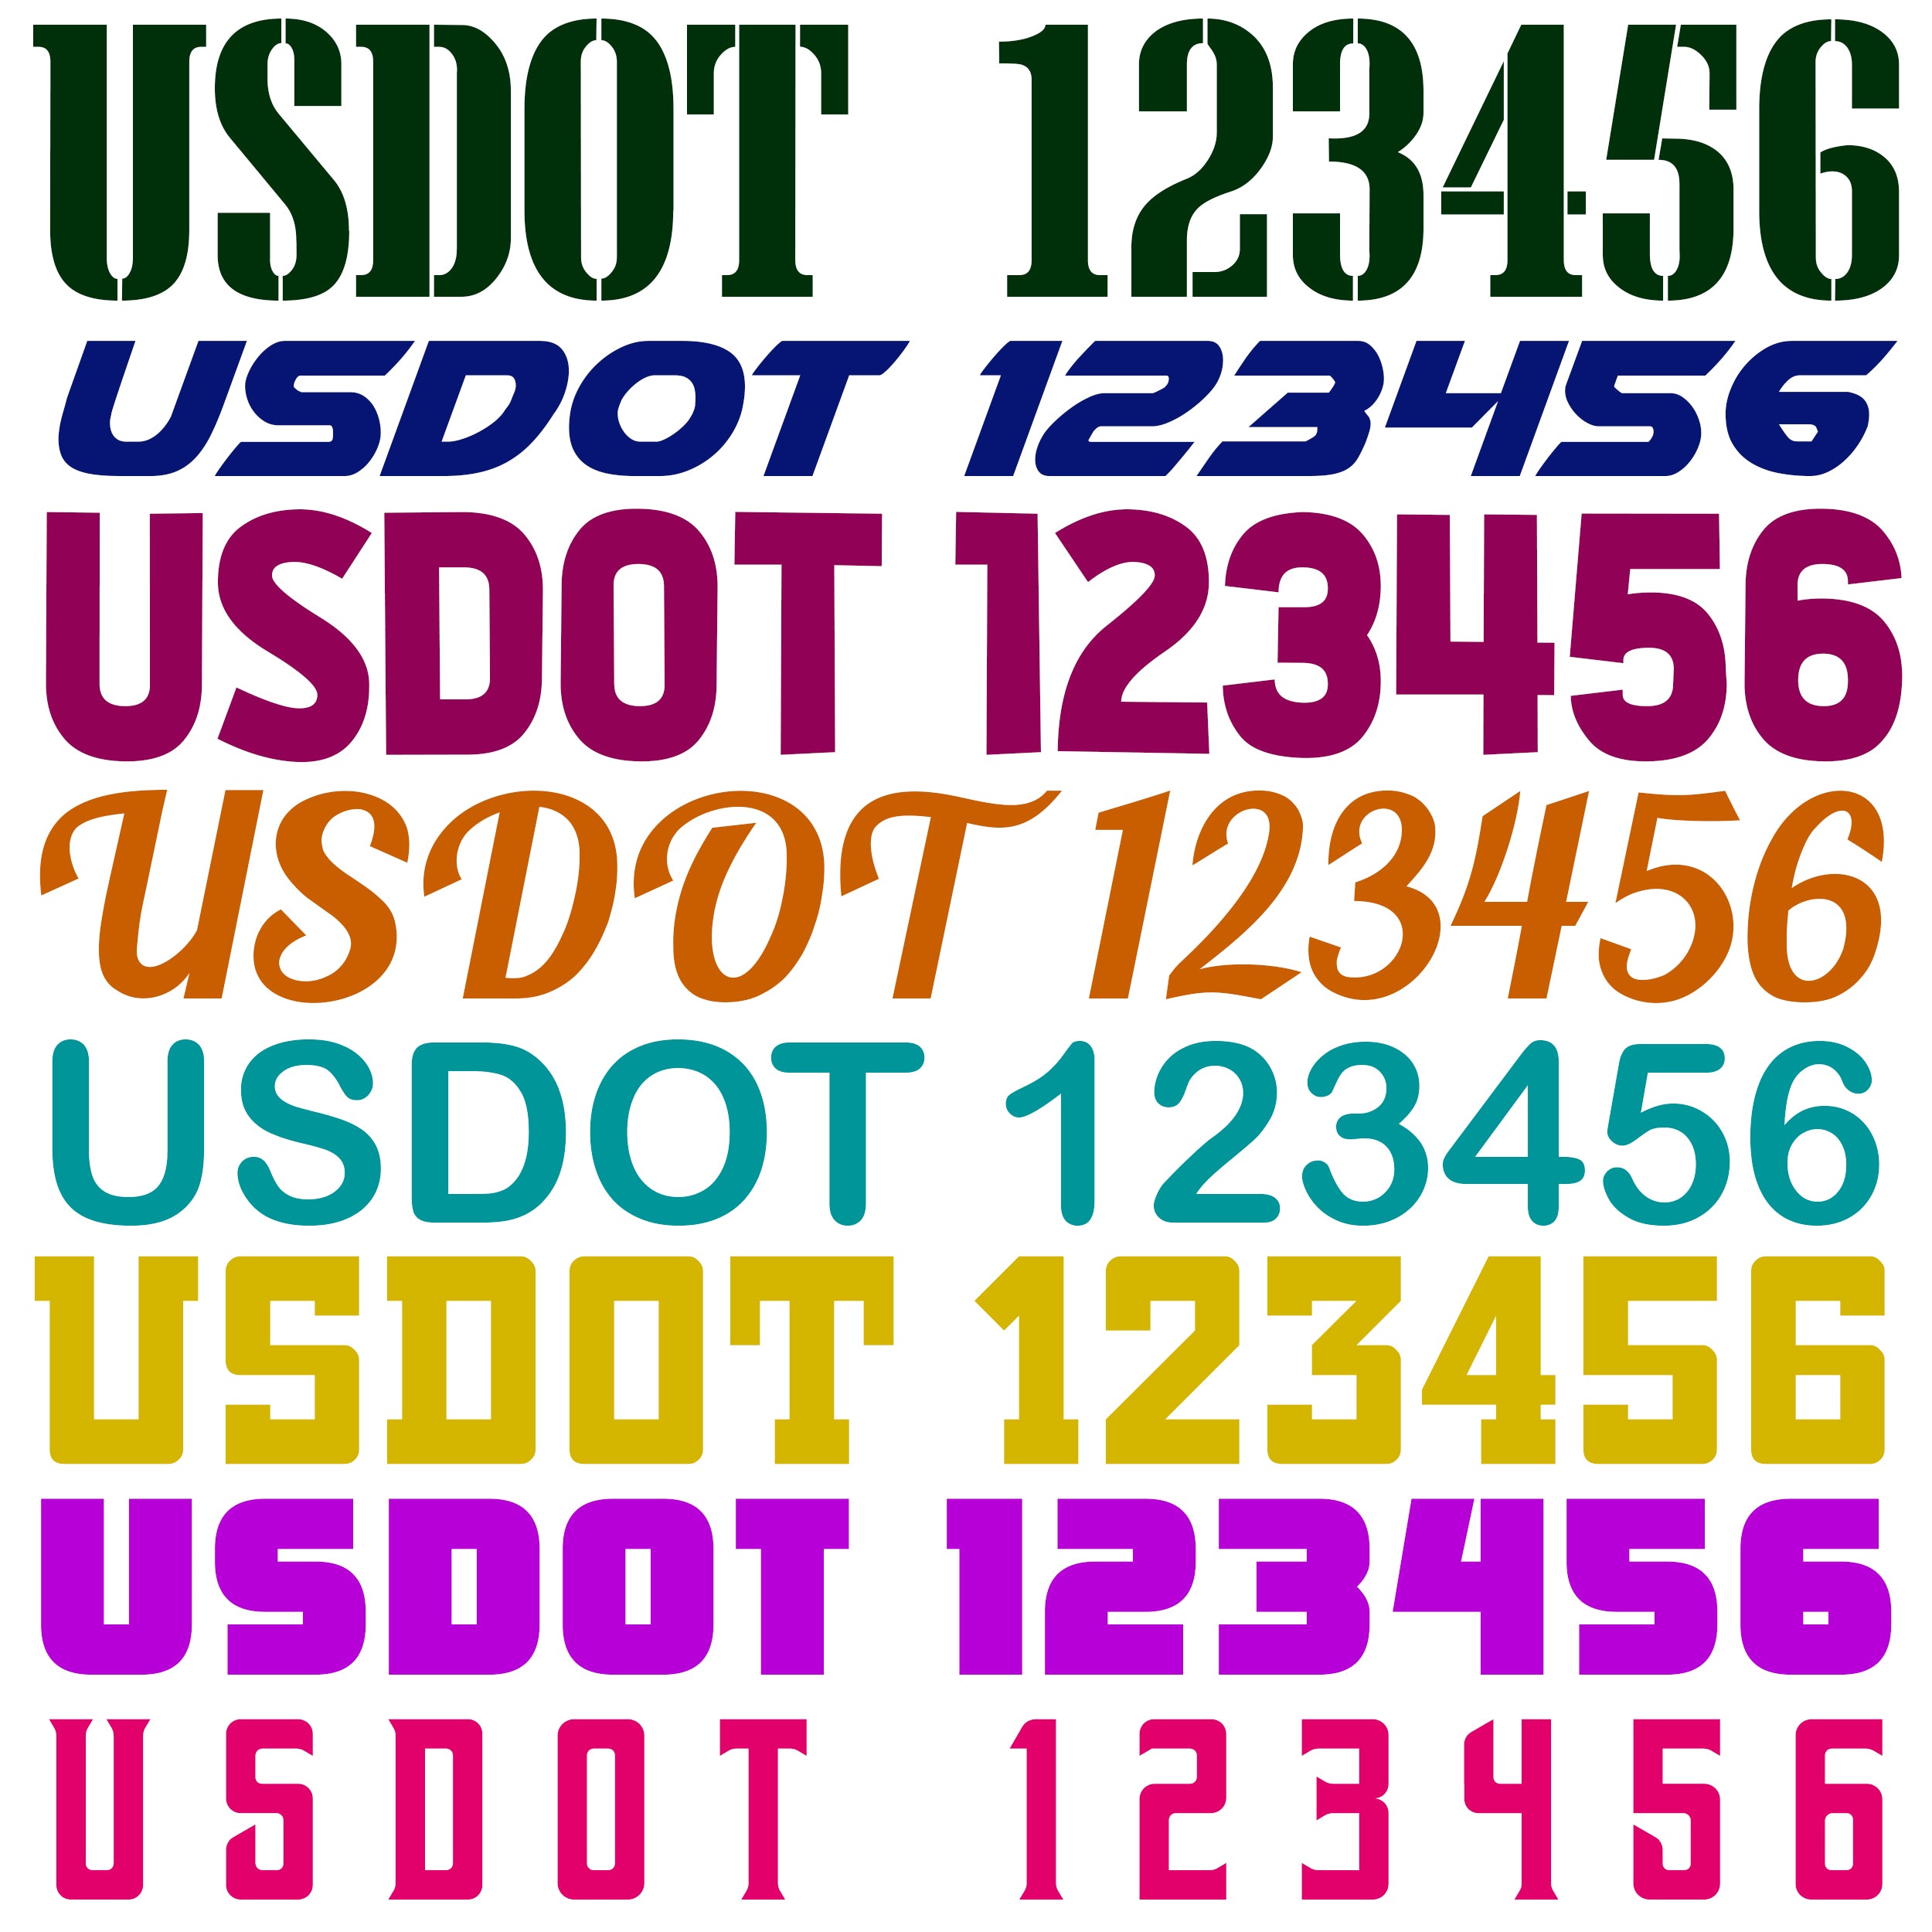 usdot number decal sticker using different fonts and color combinations 